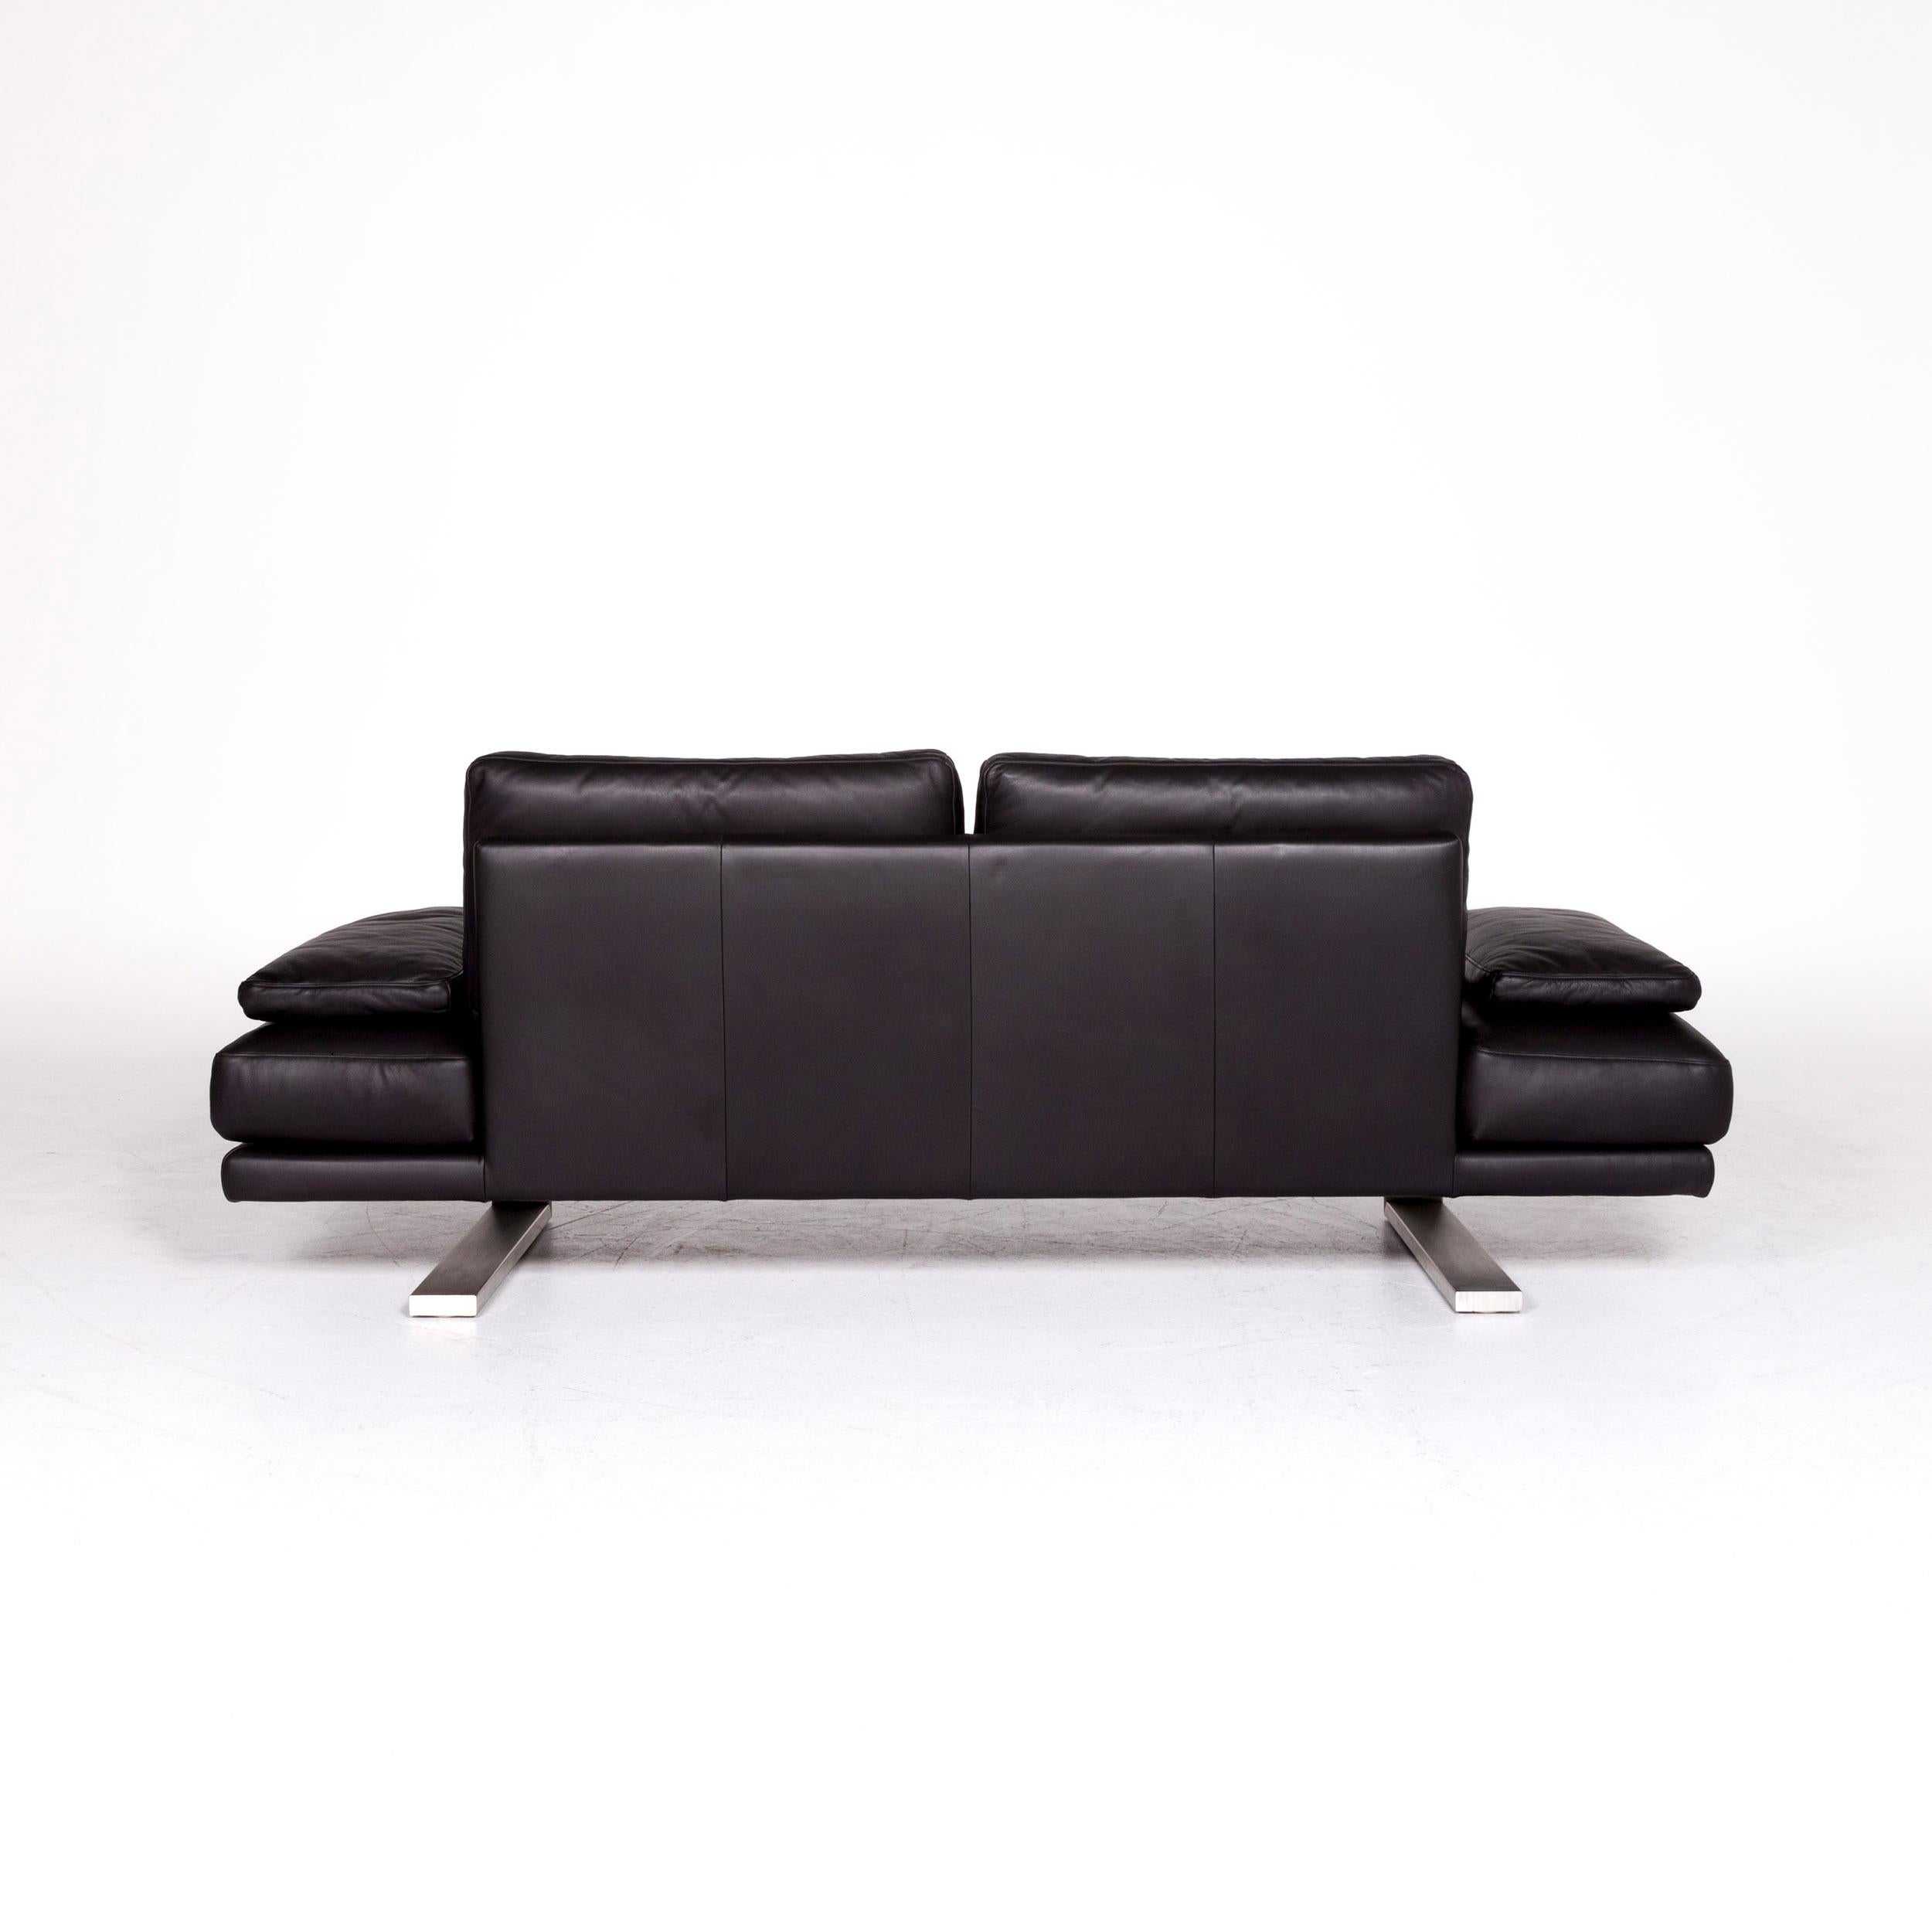 Rolf Benz 6600 Designer Leather Sofa Black Two-Seat Couch 3